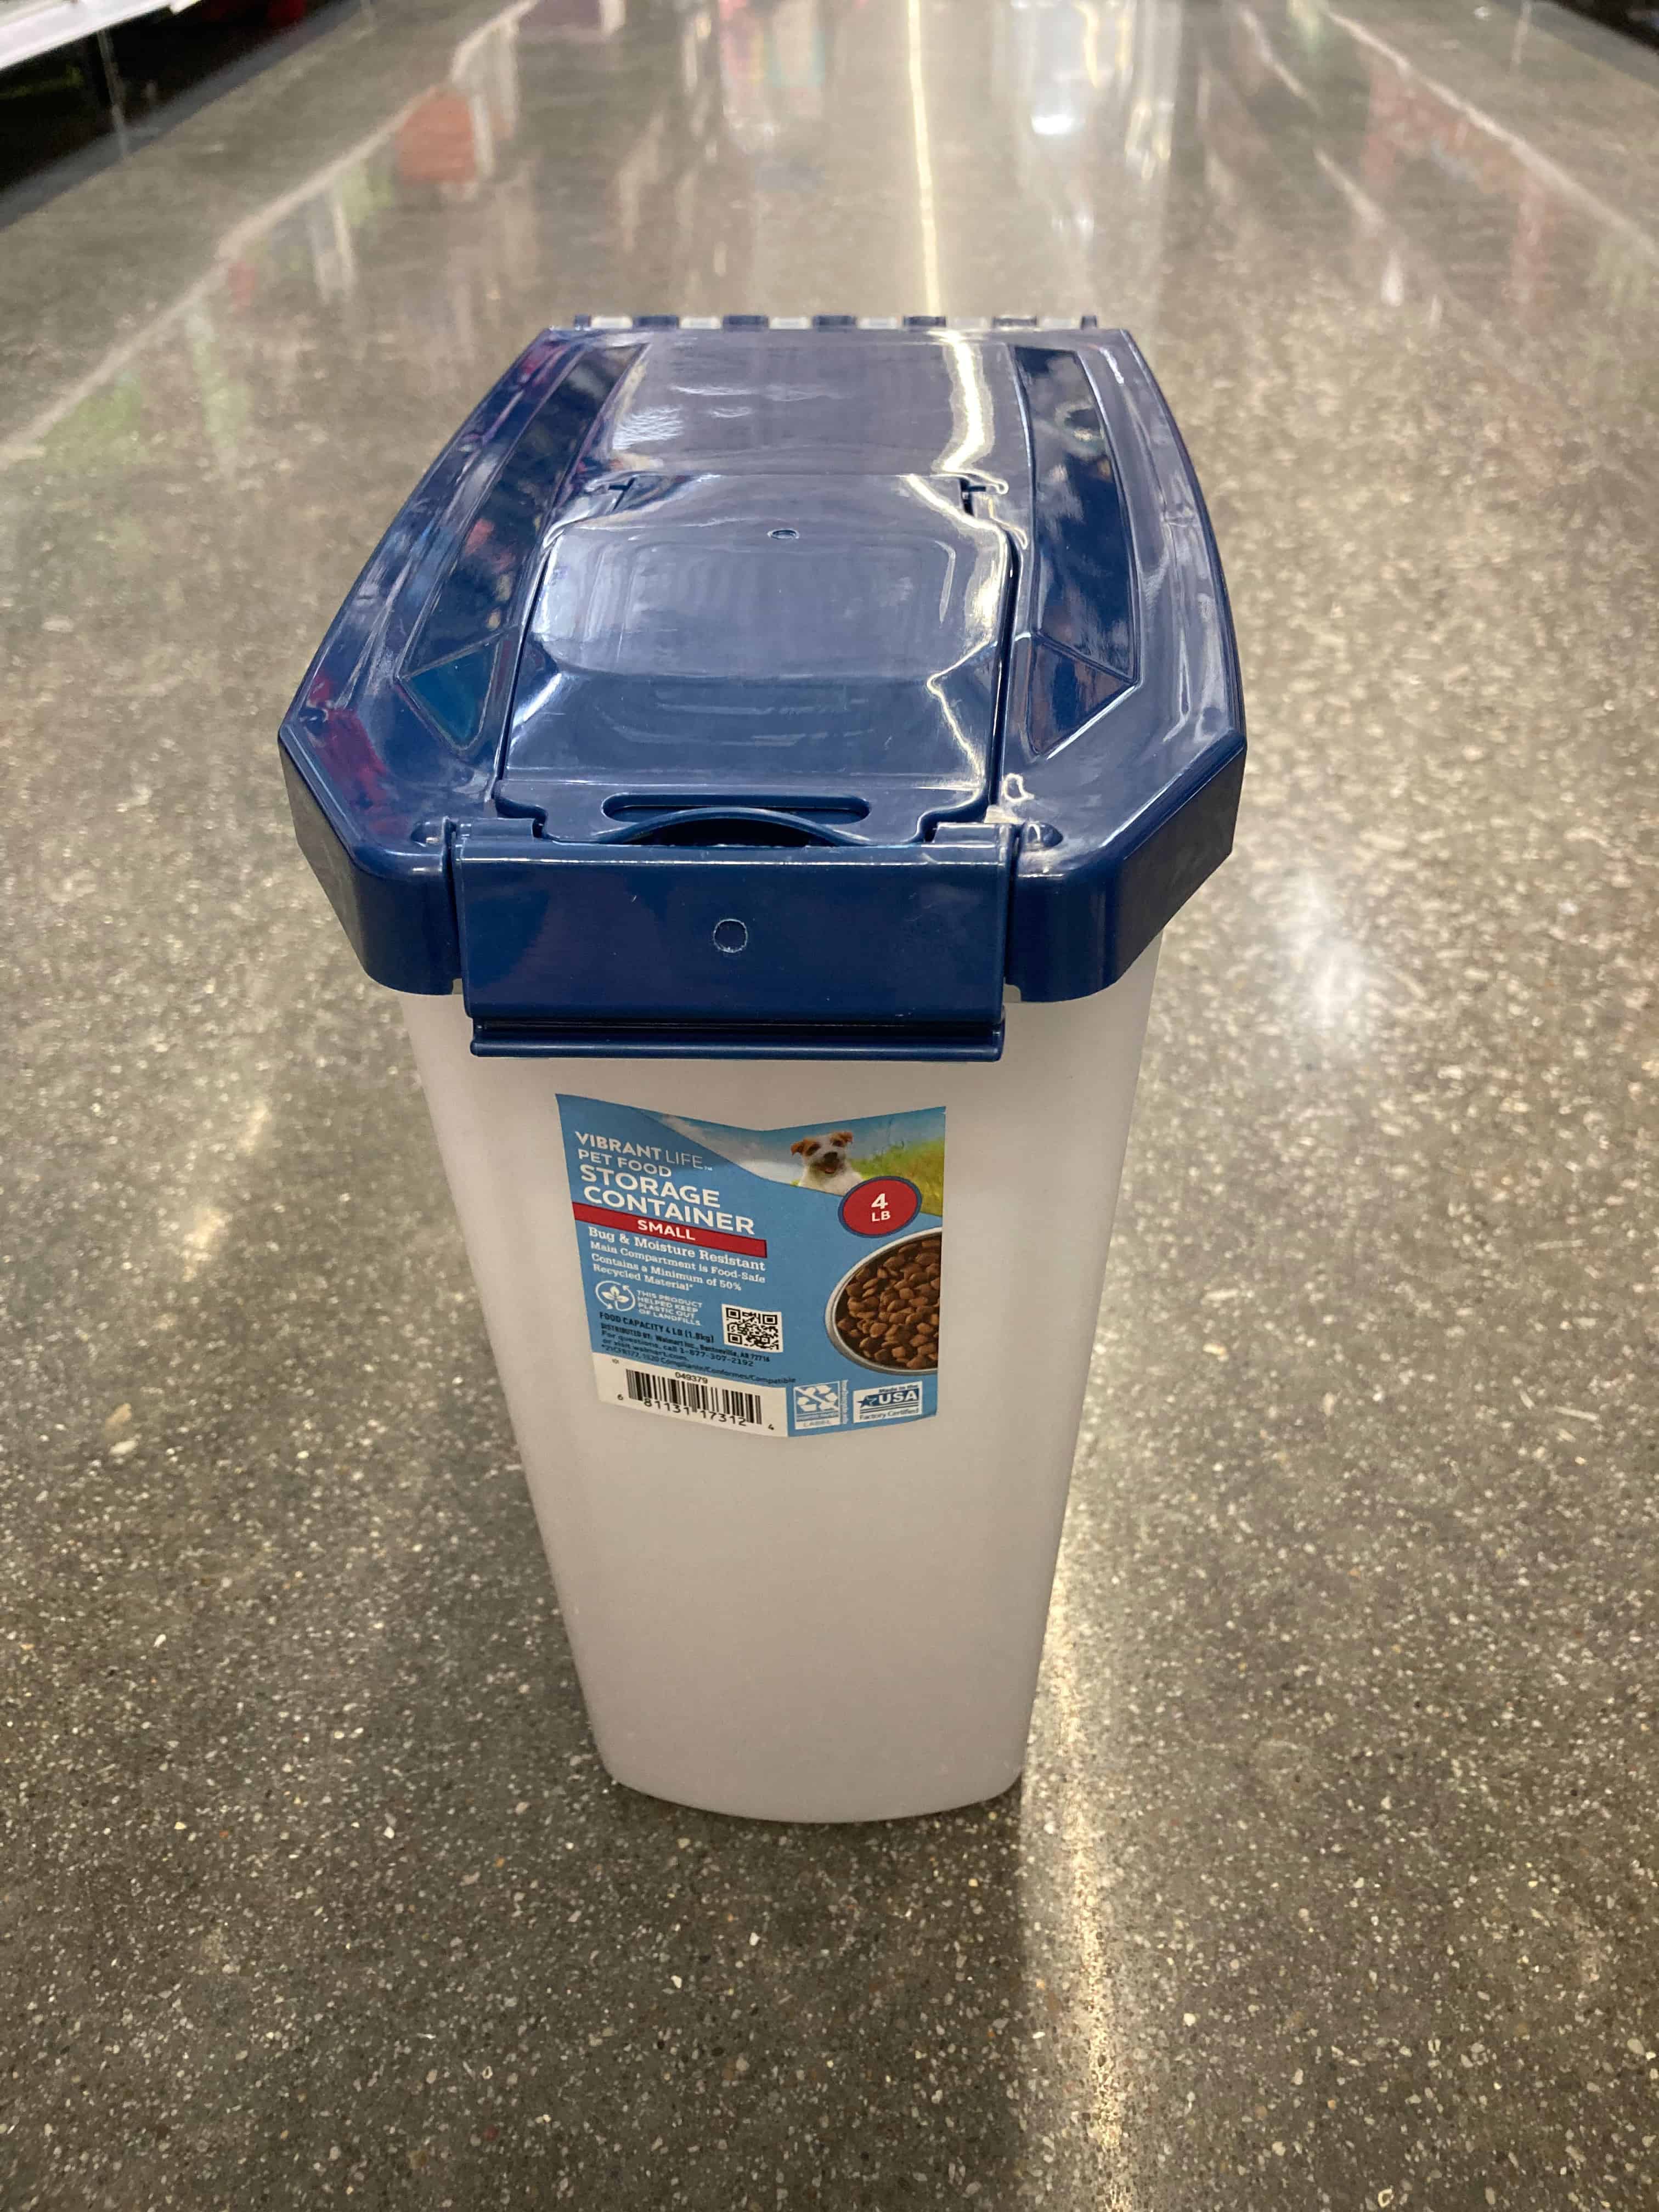 A Vibrant Life brand pet food container sits on a floor.